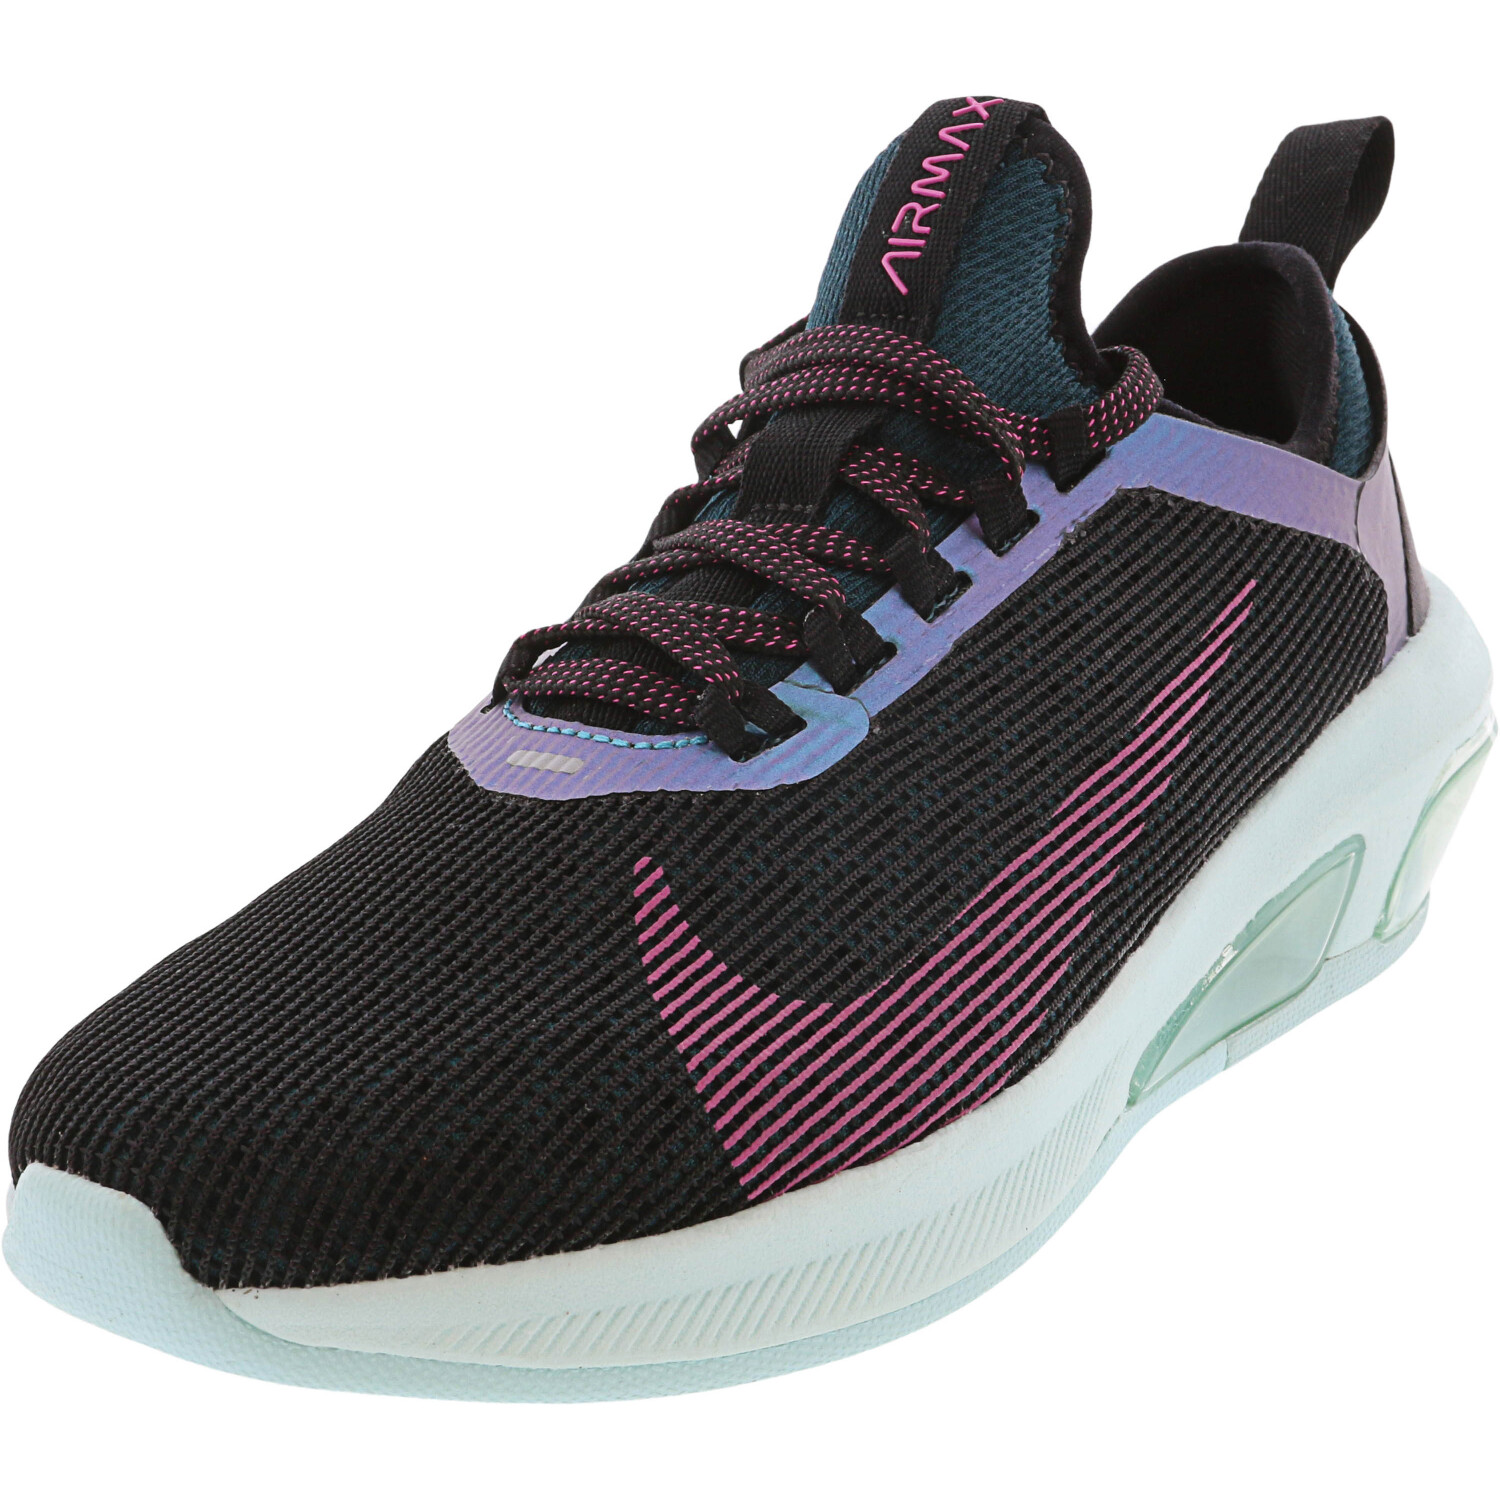 Nike Women's Air Max Fly Black / Laser Fuchsia Teal Tint Ankle-High Running - 6M - image 1 of 2